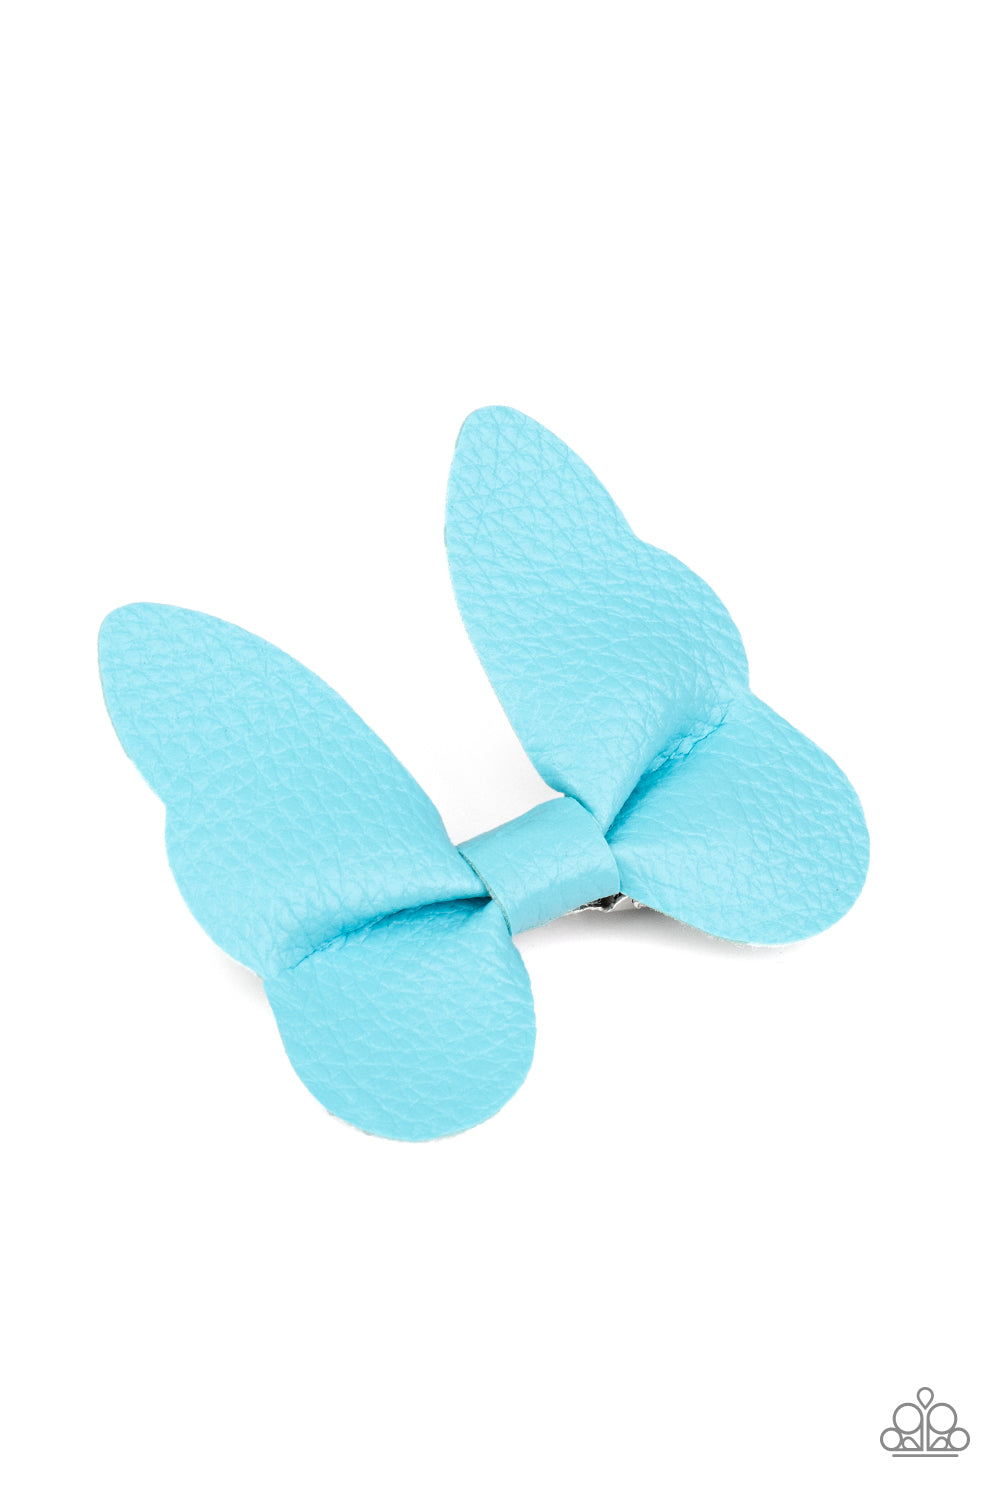 Paparazzi Butterfly Oasis - Blue Hair Accessory